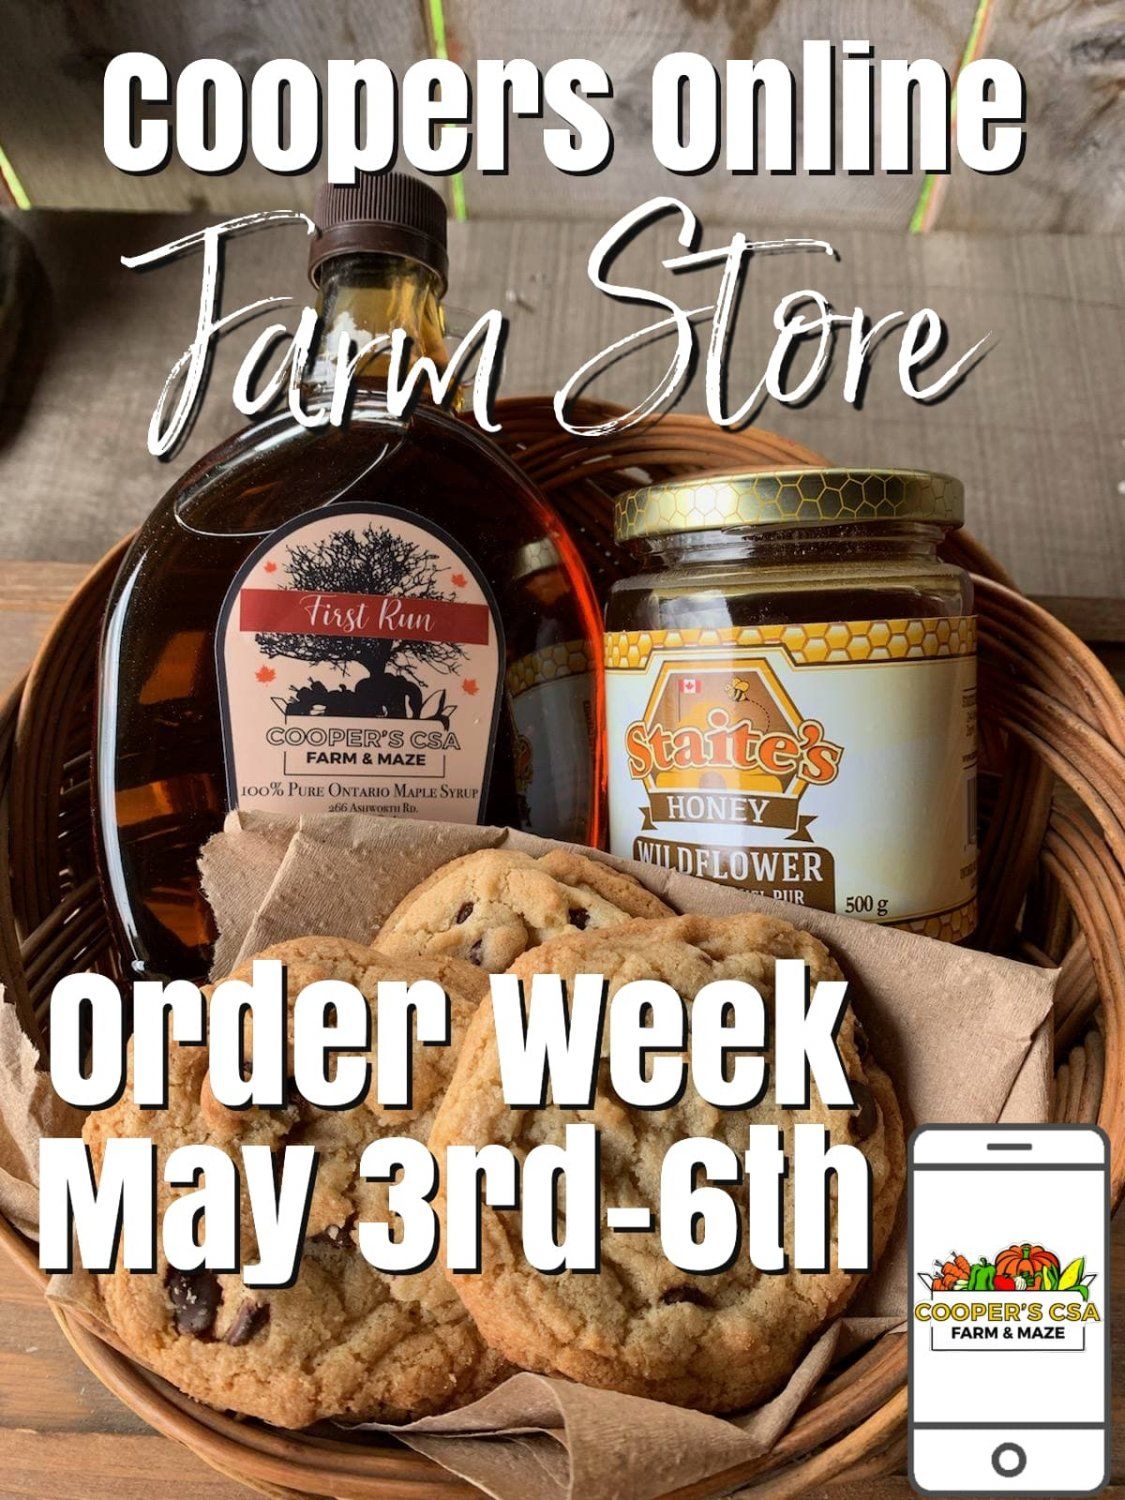 Previous Happening: Coopers Online Farm Stand-Order Week May 3rd-6th